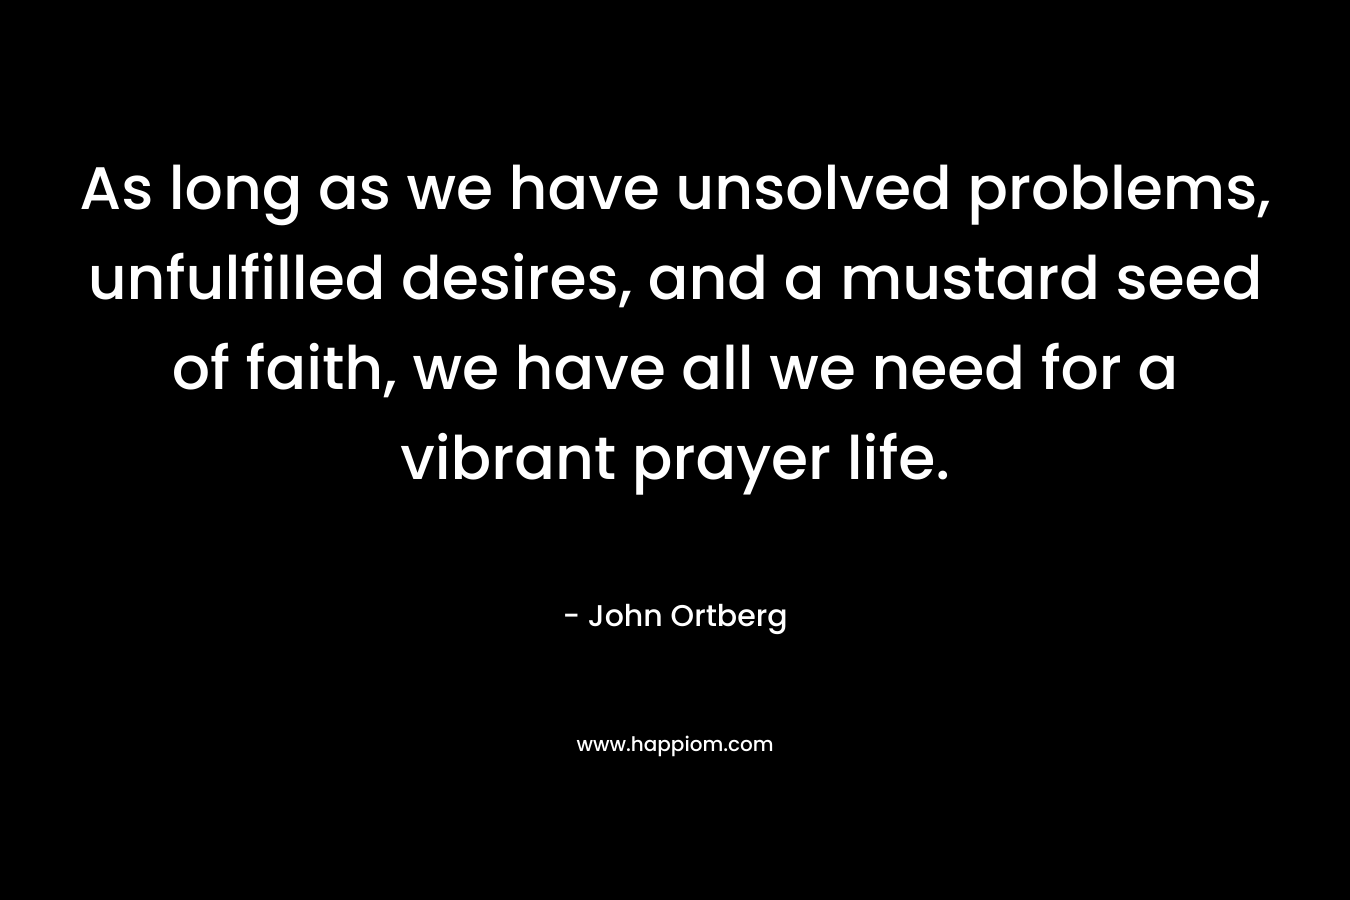 As long as we have unsolved problems, unfulfilled desires, and a mustard seed of faith, we have all we need for a vibrant prayer life. – John Ortberg